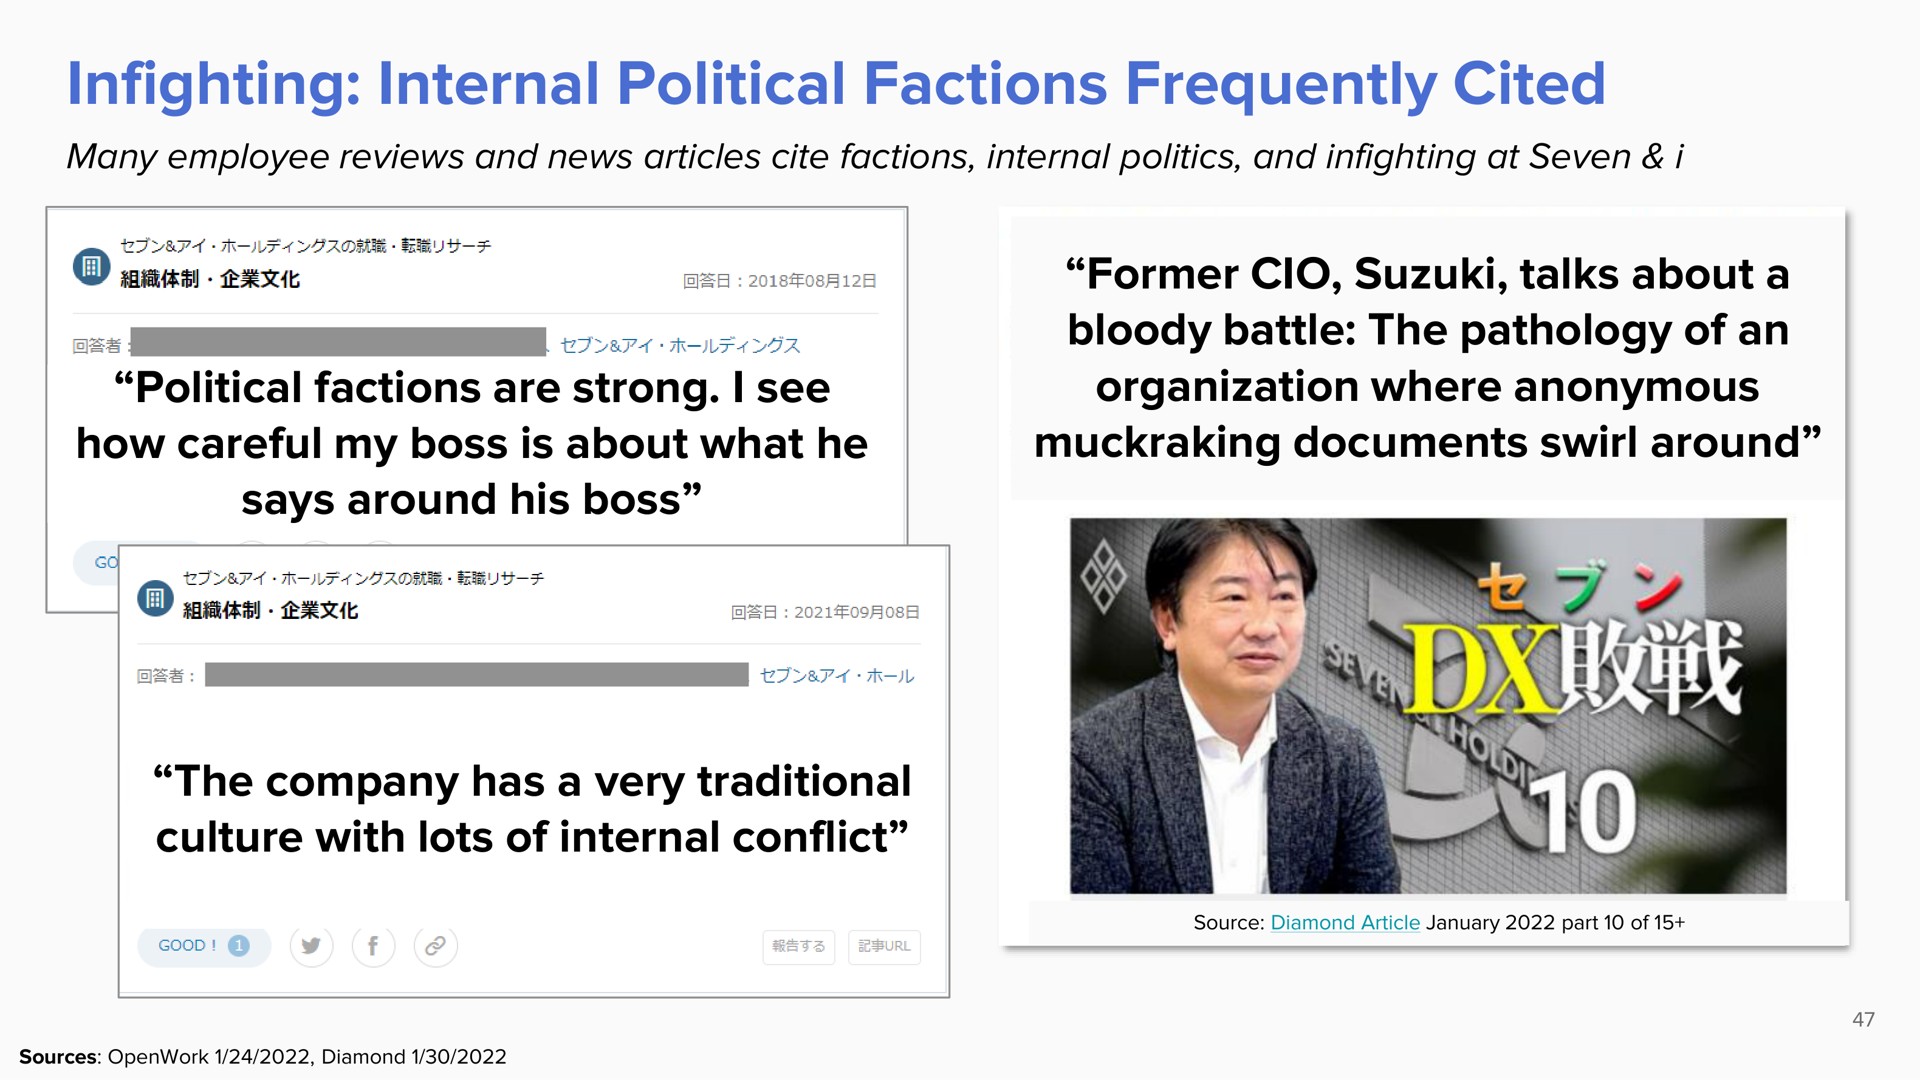 infighting internal political factions frequently cited political factions are strong i see how careful my boss is about what he says around his boss former talks about a bloody battle the pathology of an organization where anonymous muckraking documents swirl around the company has a very traditional culture with lots of internal conflict sans | ValueAct Capital